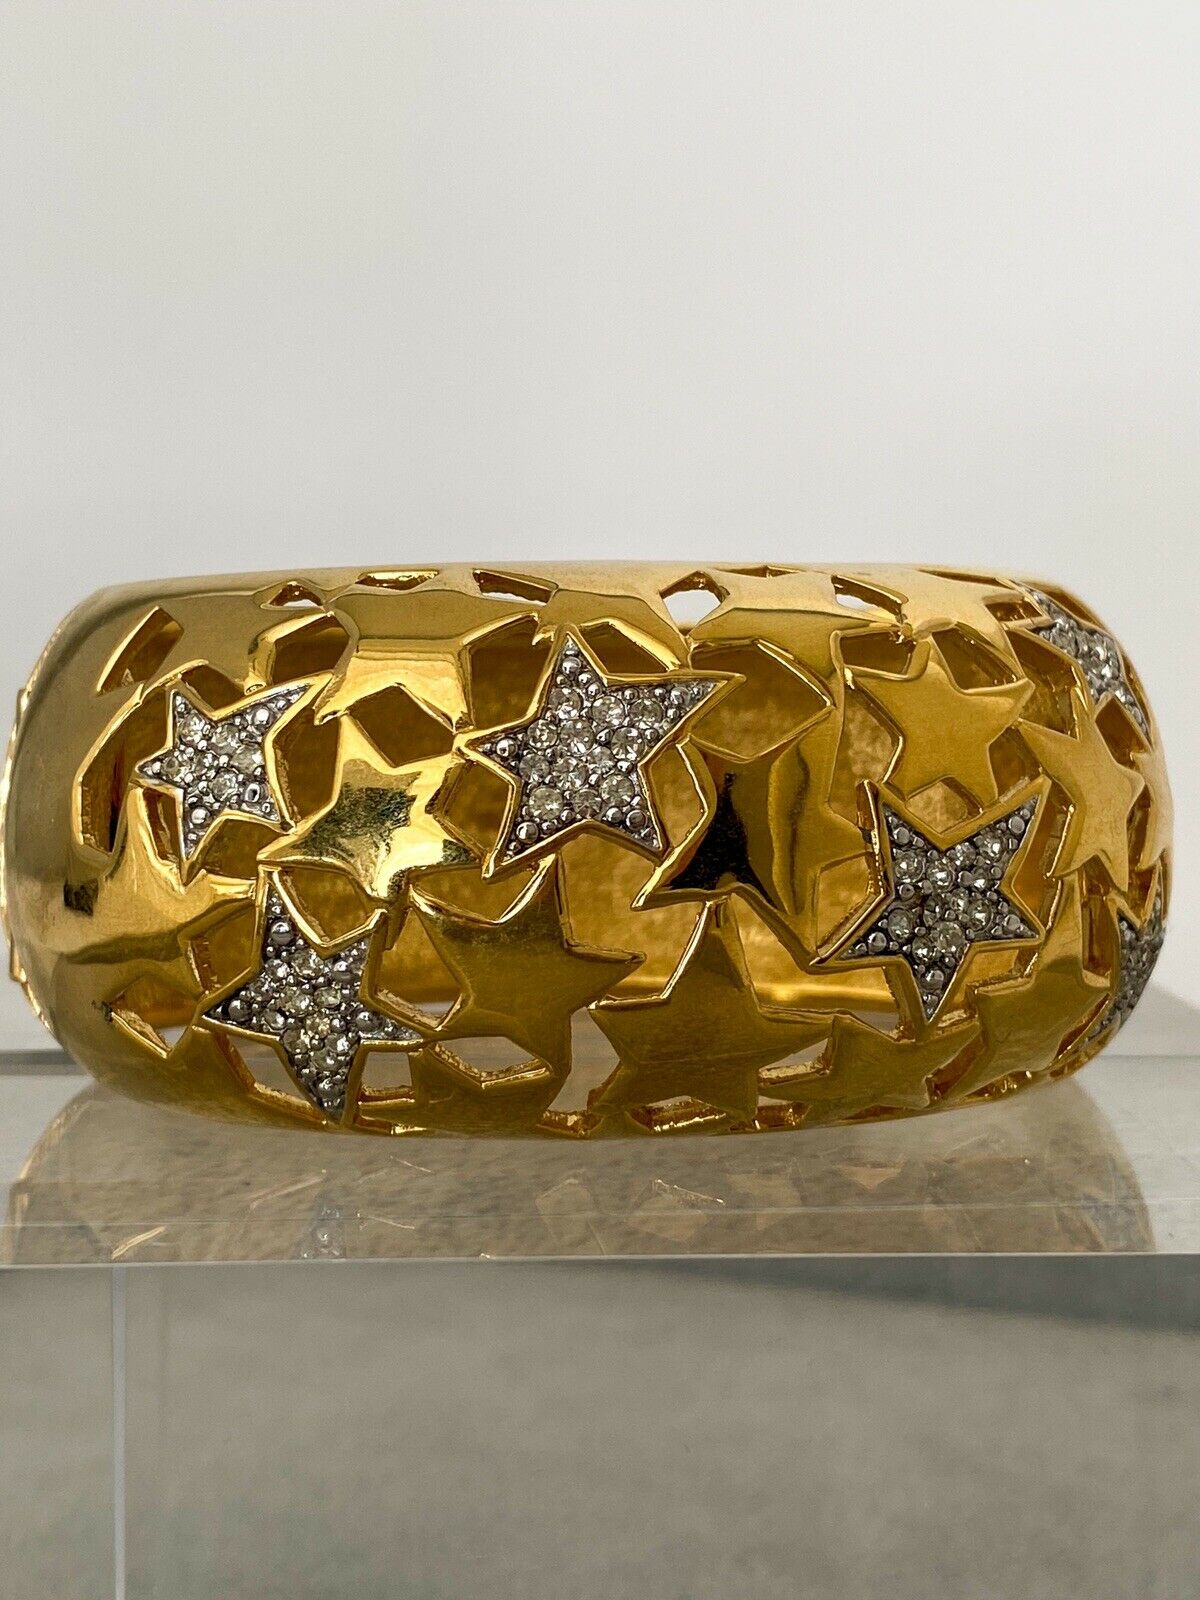 【SOLD OUT】GIVENCHY Gold Tone Openwork Bangle Cuff Bracelet Star Rhinestone Vintage